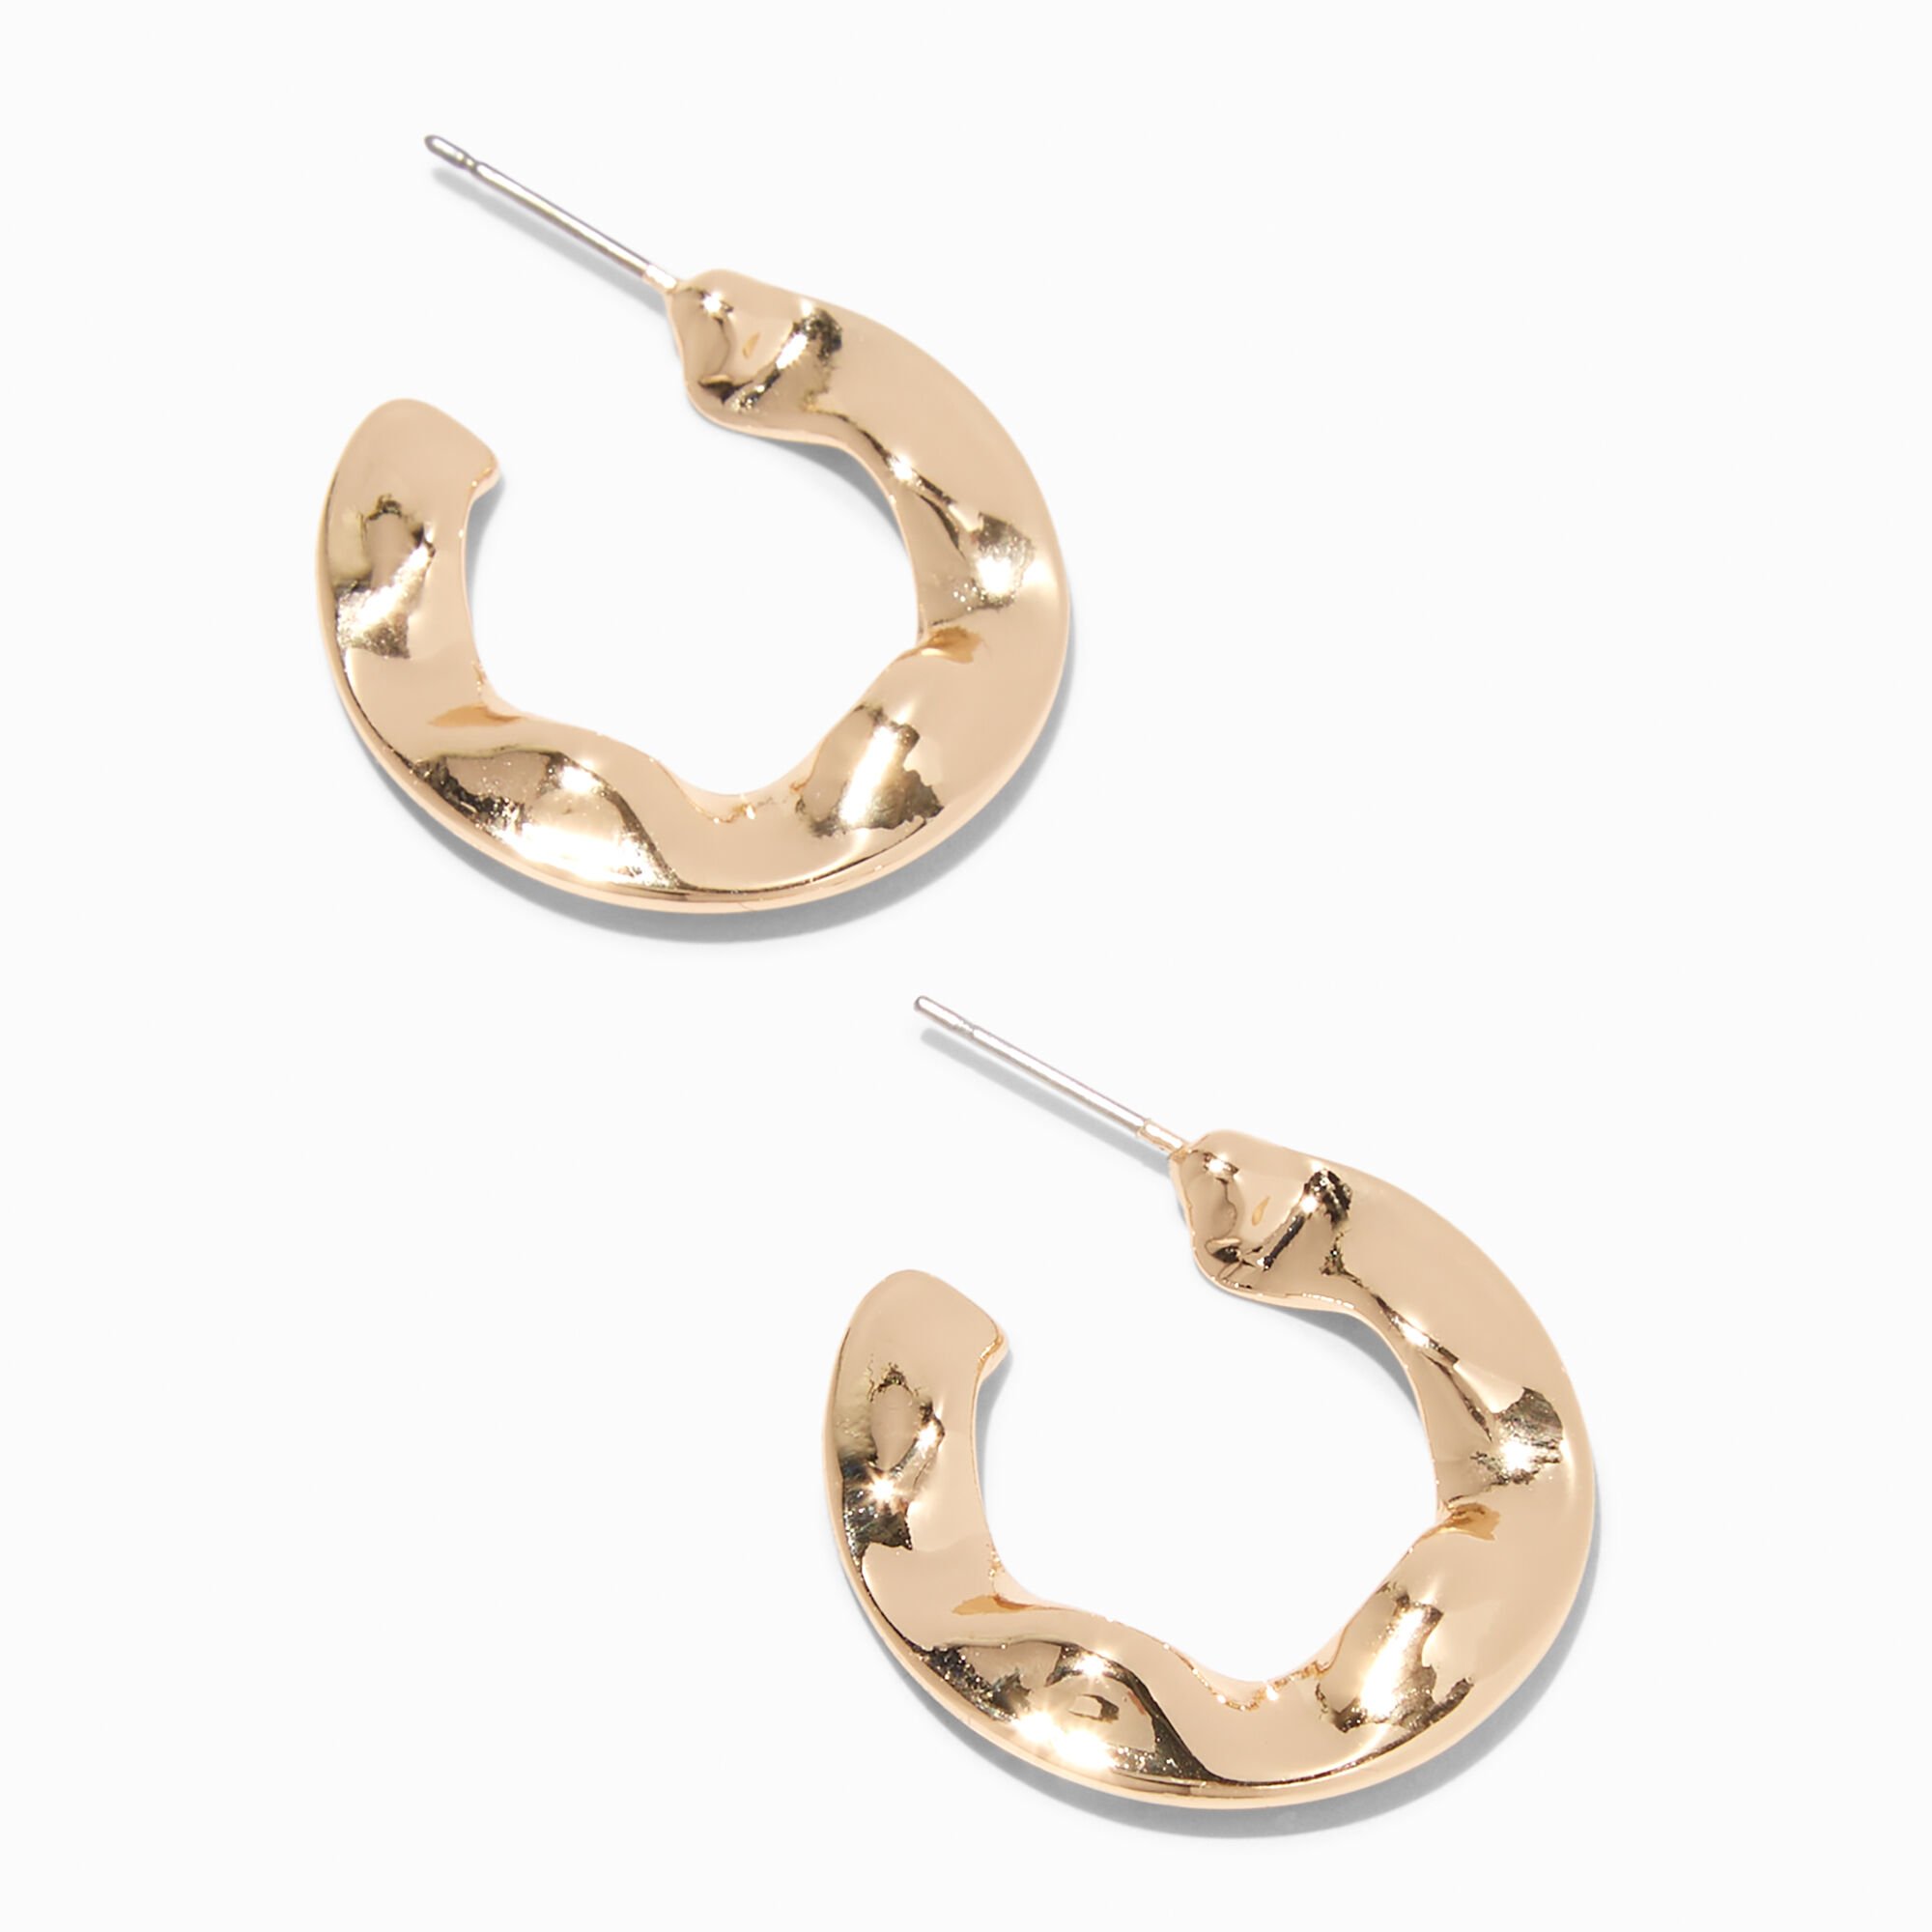 View Claires Tone 20MM Hammered Hoop Earrings Gold information